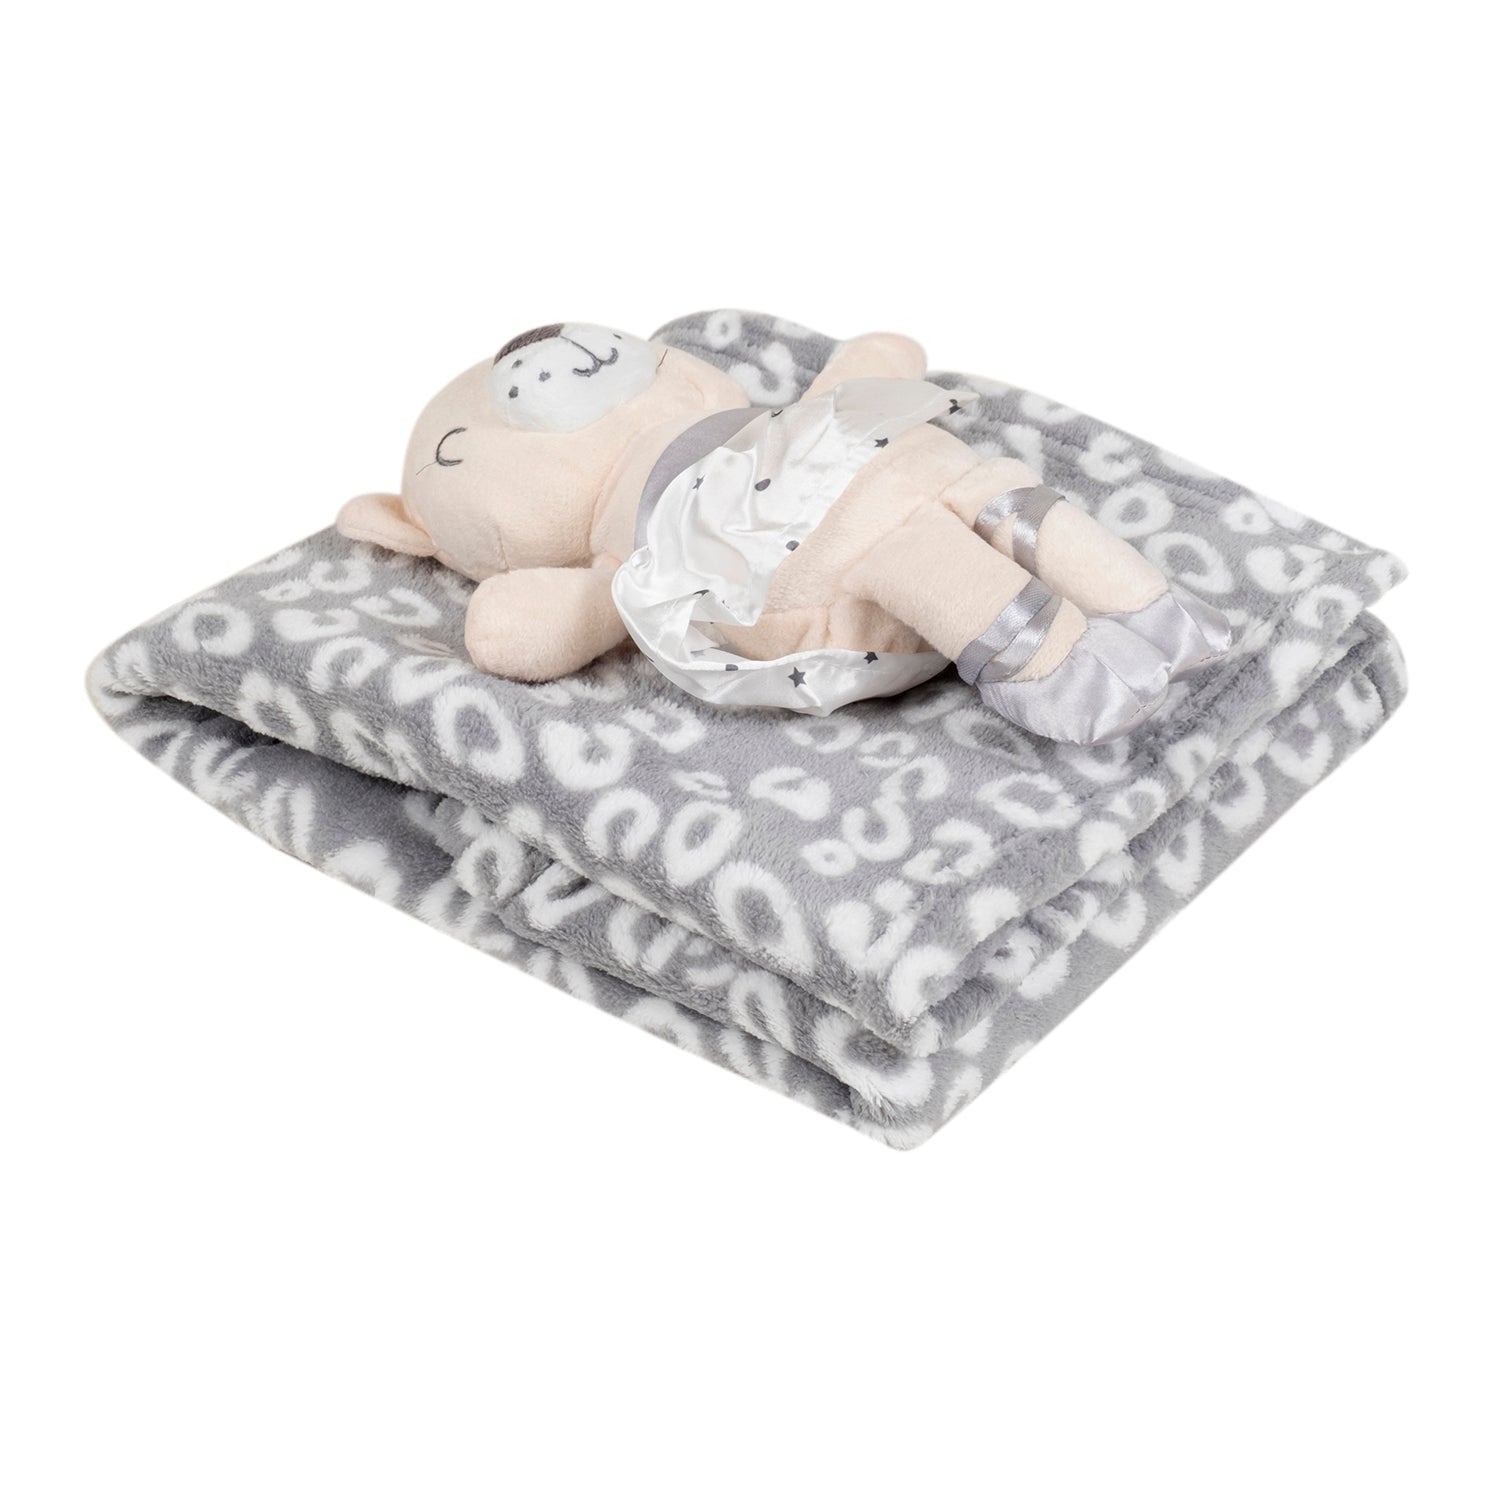 Baby Moo Bear Snuggle Buddy Soft Rattle and Plush Blanket Gift Toy Blanket - Grey